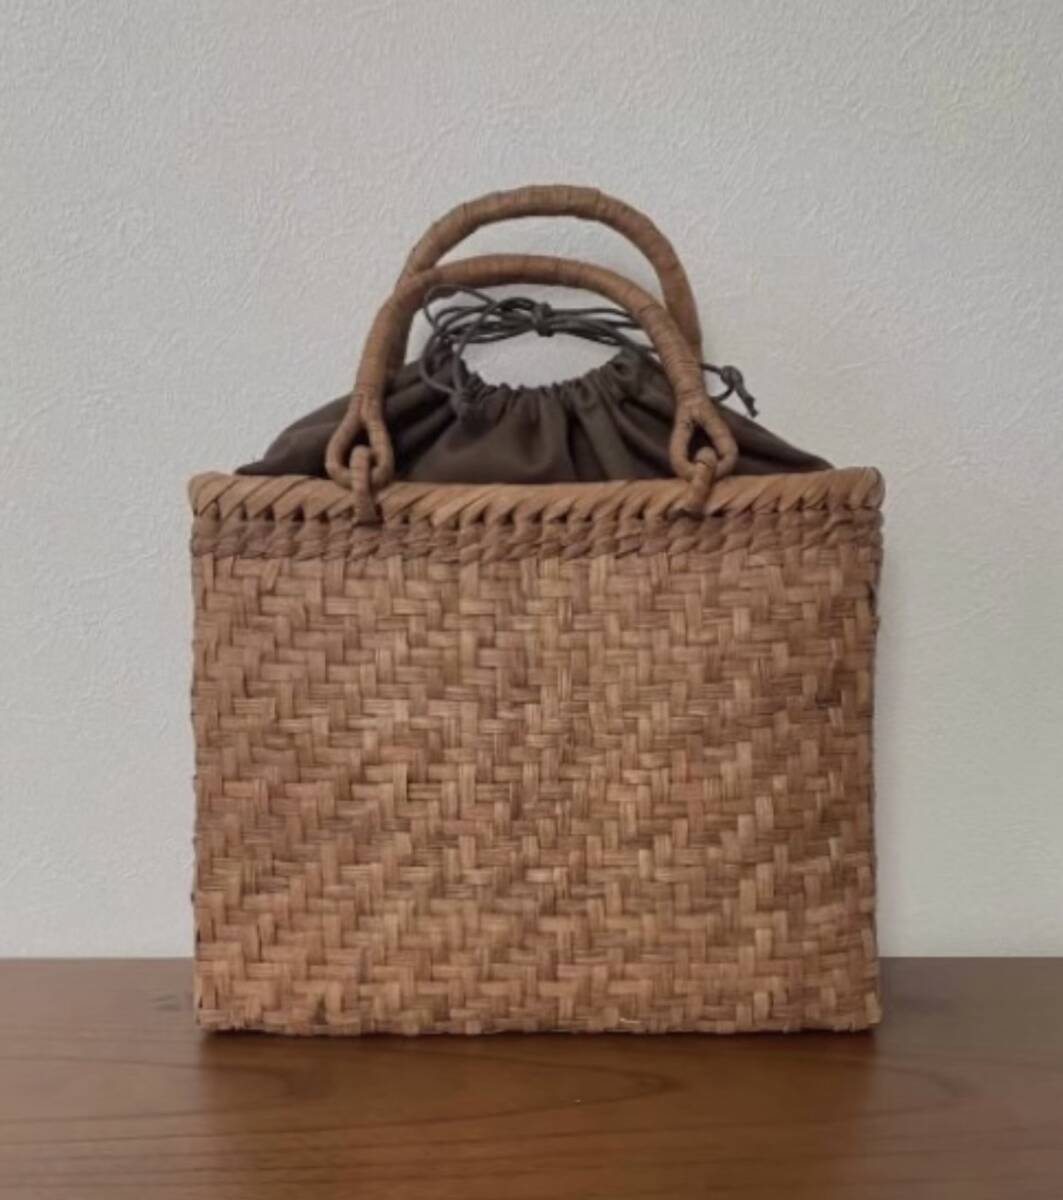  Nagano production unused goods size L worker hand-knitted net fee braided mountain ... bag ring handle 